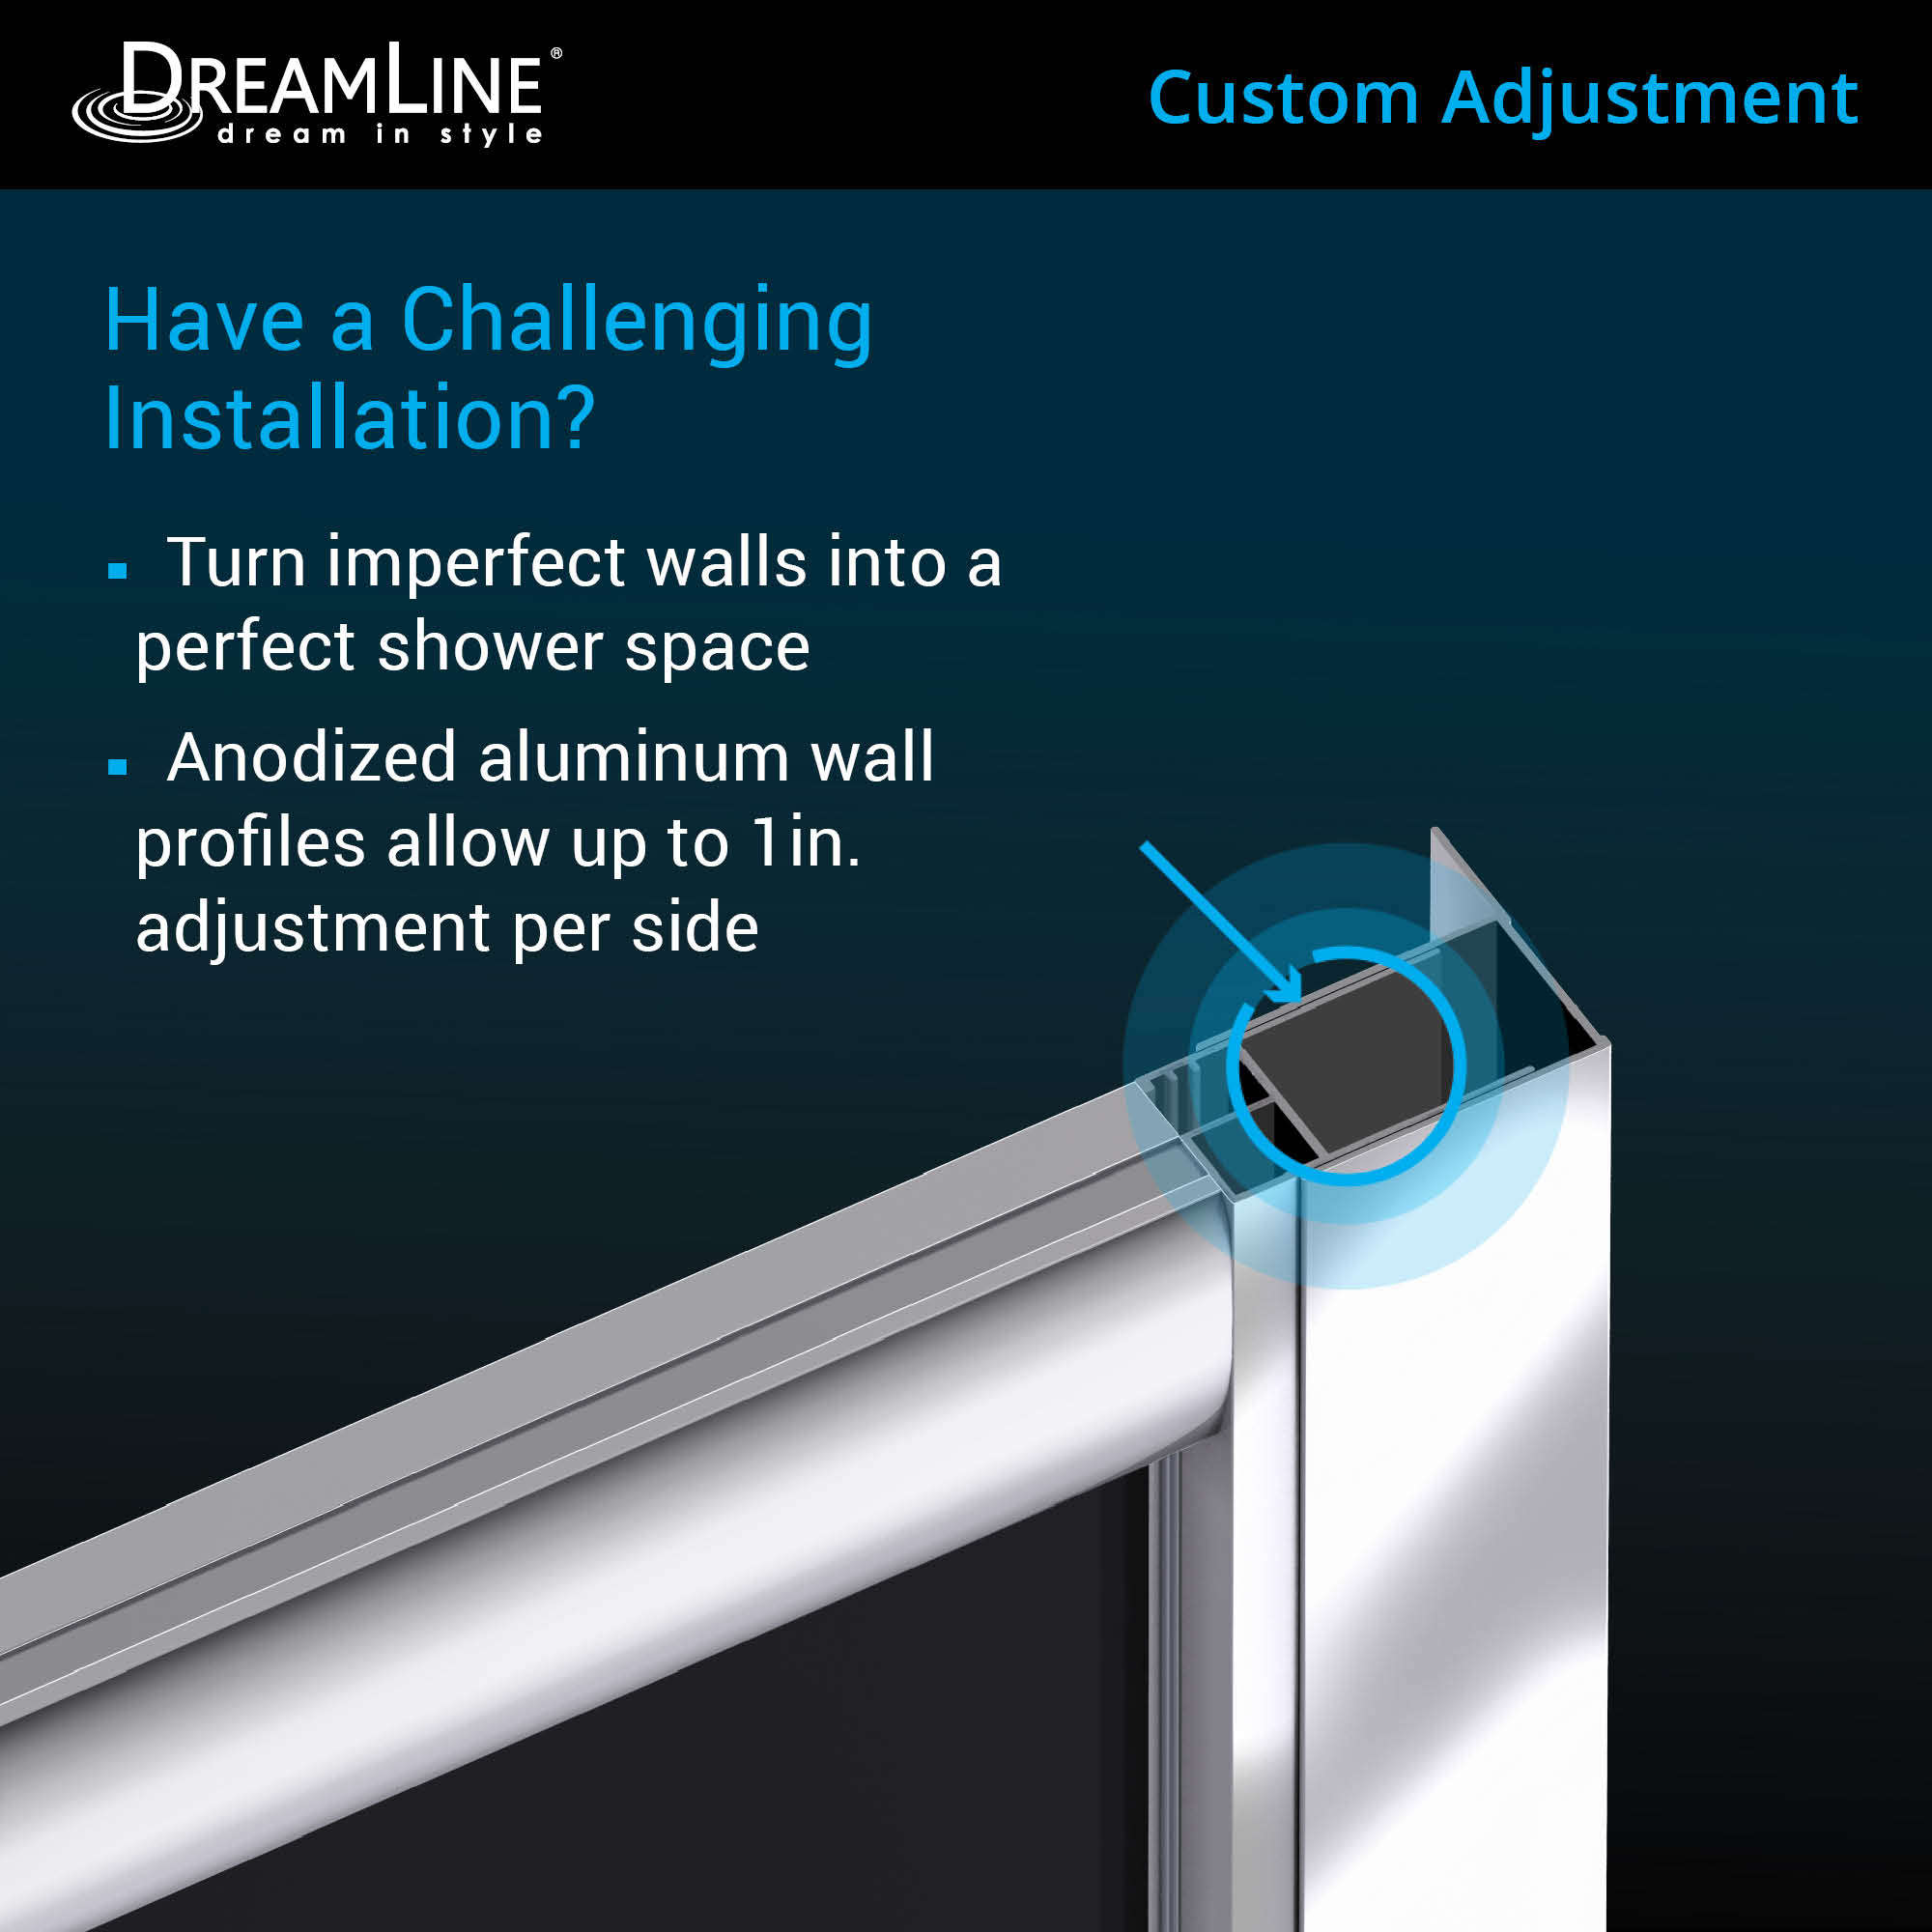 DreamLine Prime 38 in. x 74 3/4 in. Semi-Frameless Frosted Glass Sliding Shower Enclosure in Brushed Nickel with White Base Kit